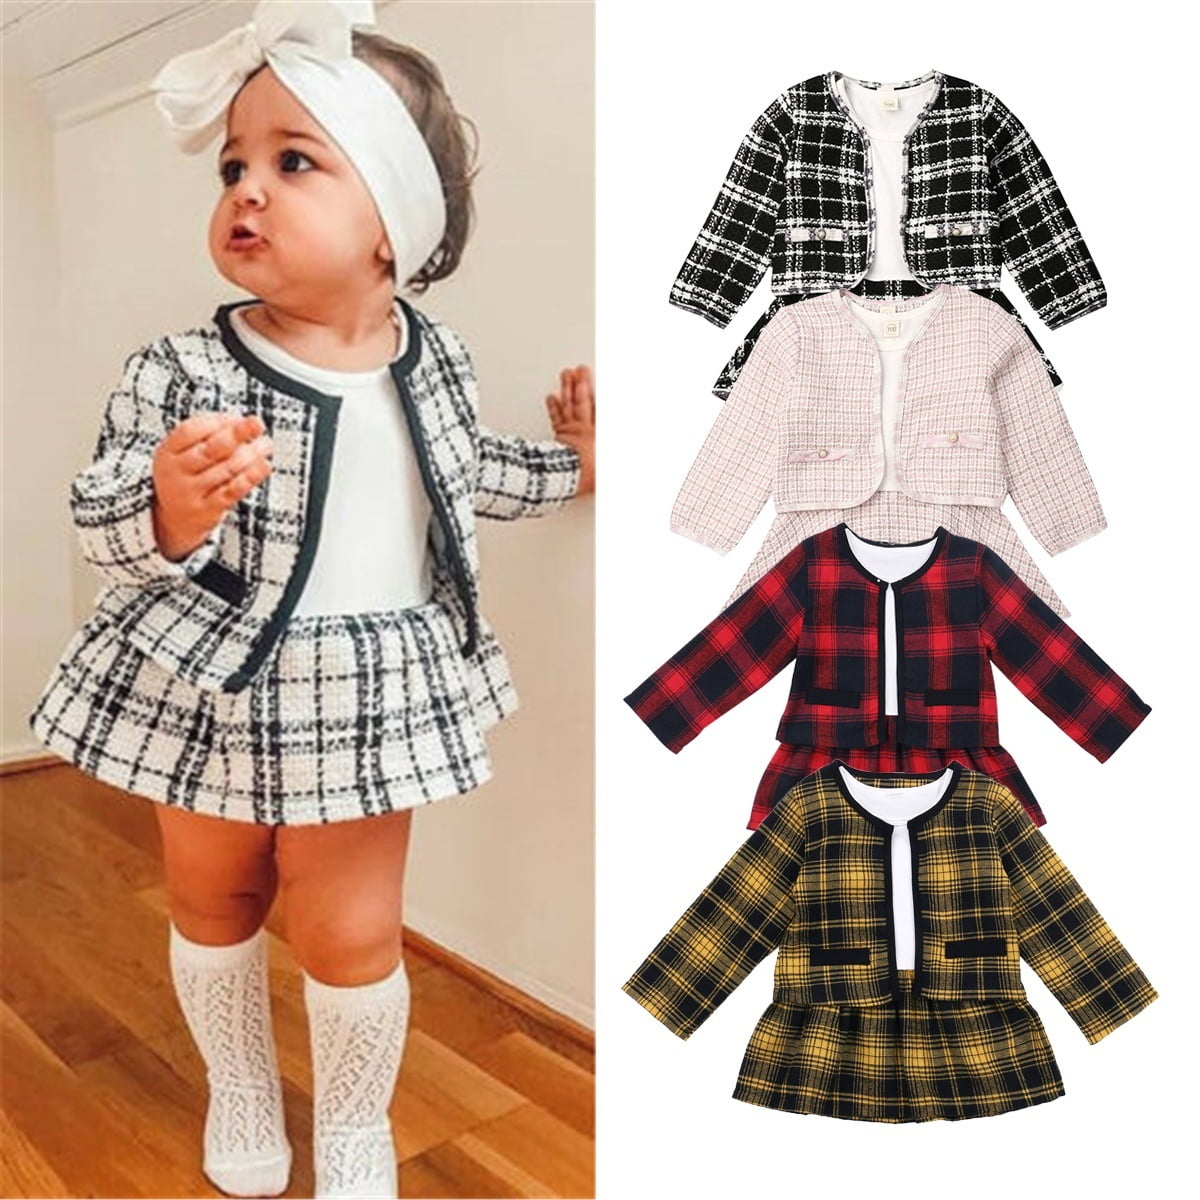 Toddler Baby Girls Winter Clothes Plaid Coat Tops+Tutu Dress Formal Outfits 